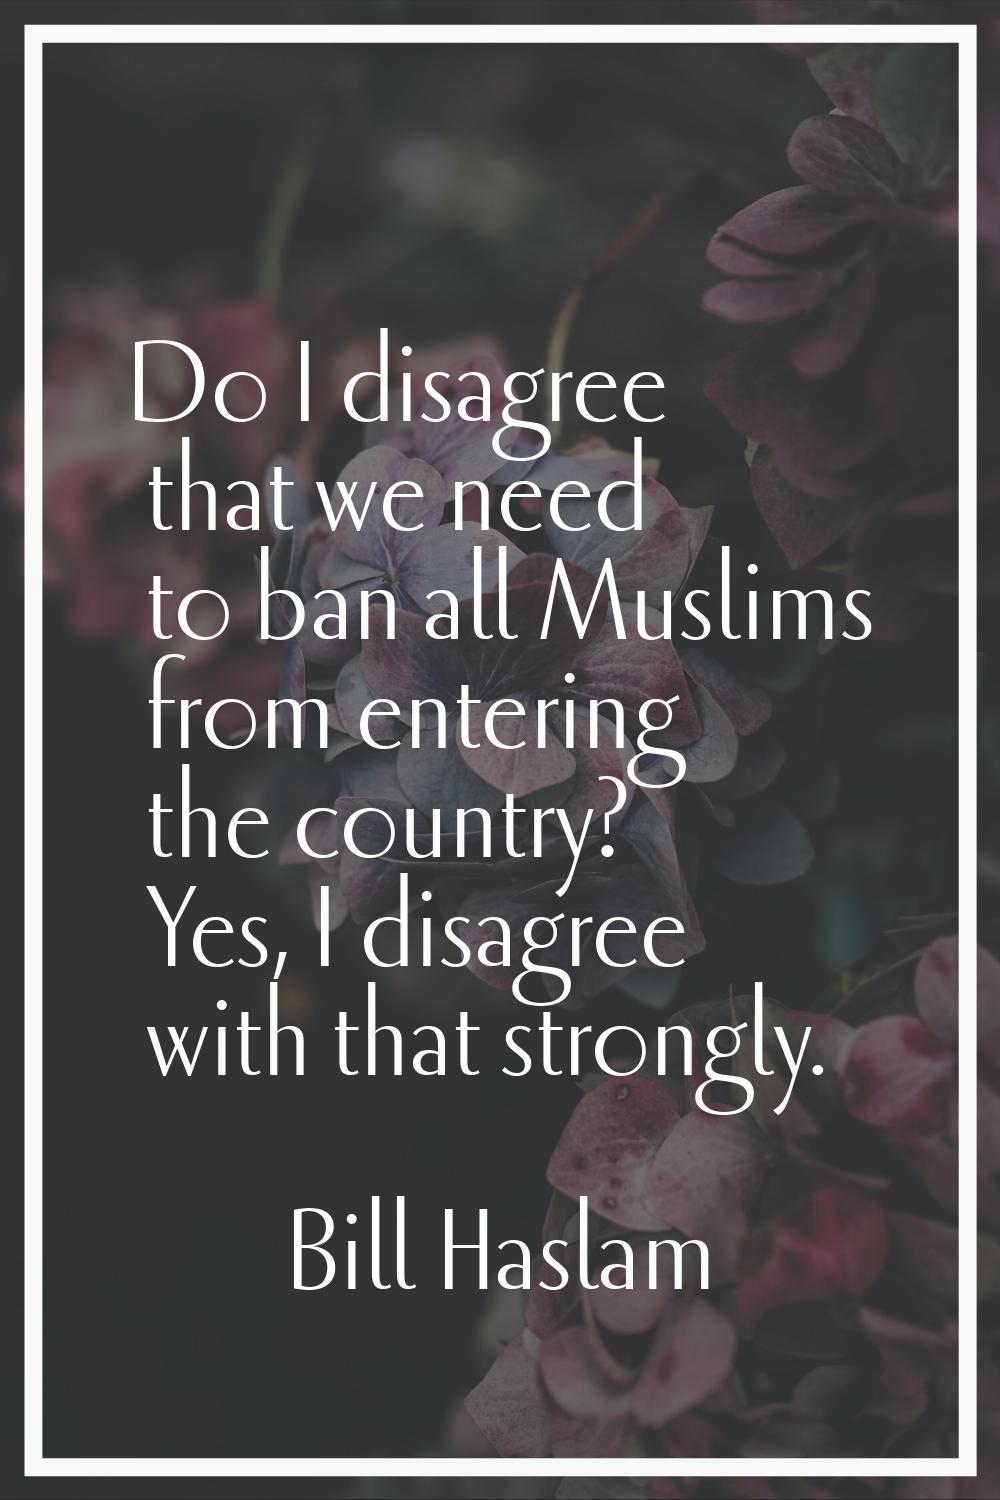 Do I disagree that we need to ban all Muslims from entering the country? Yes, I disagree with that 